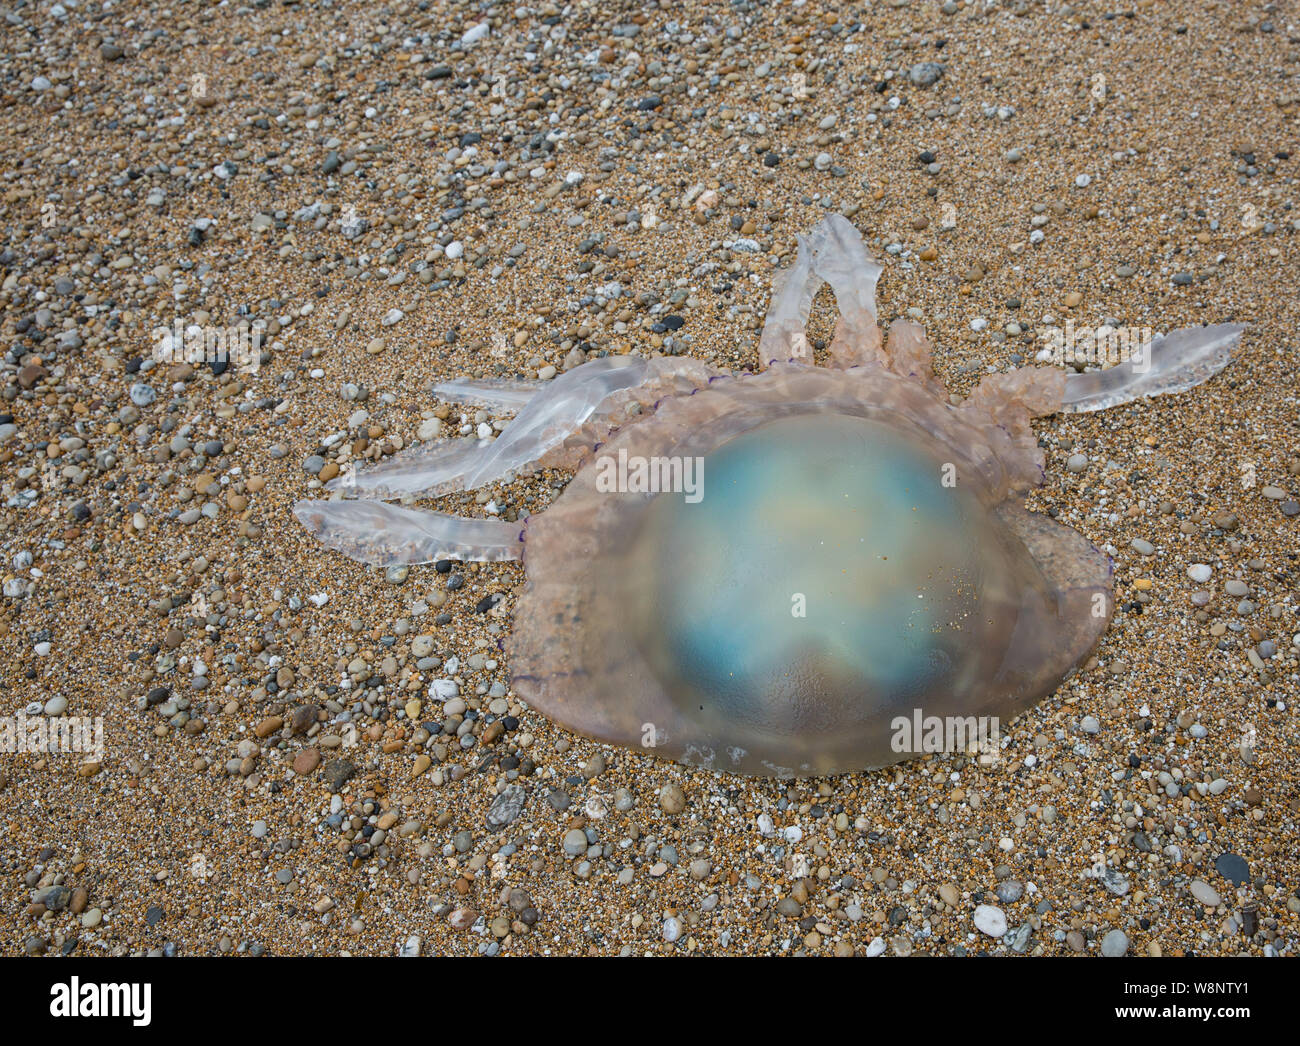 A giant barrell Jellyfish washed up on a Cornish beach in an environmental issue image with copy space Stock Photo